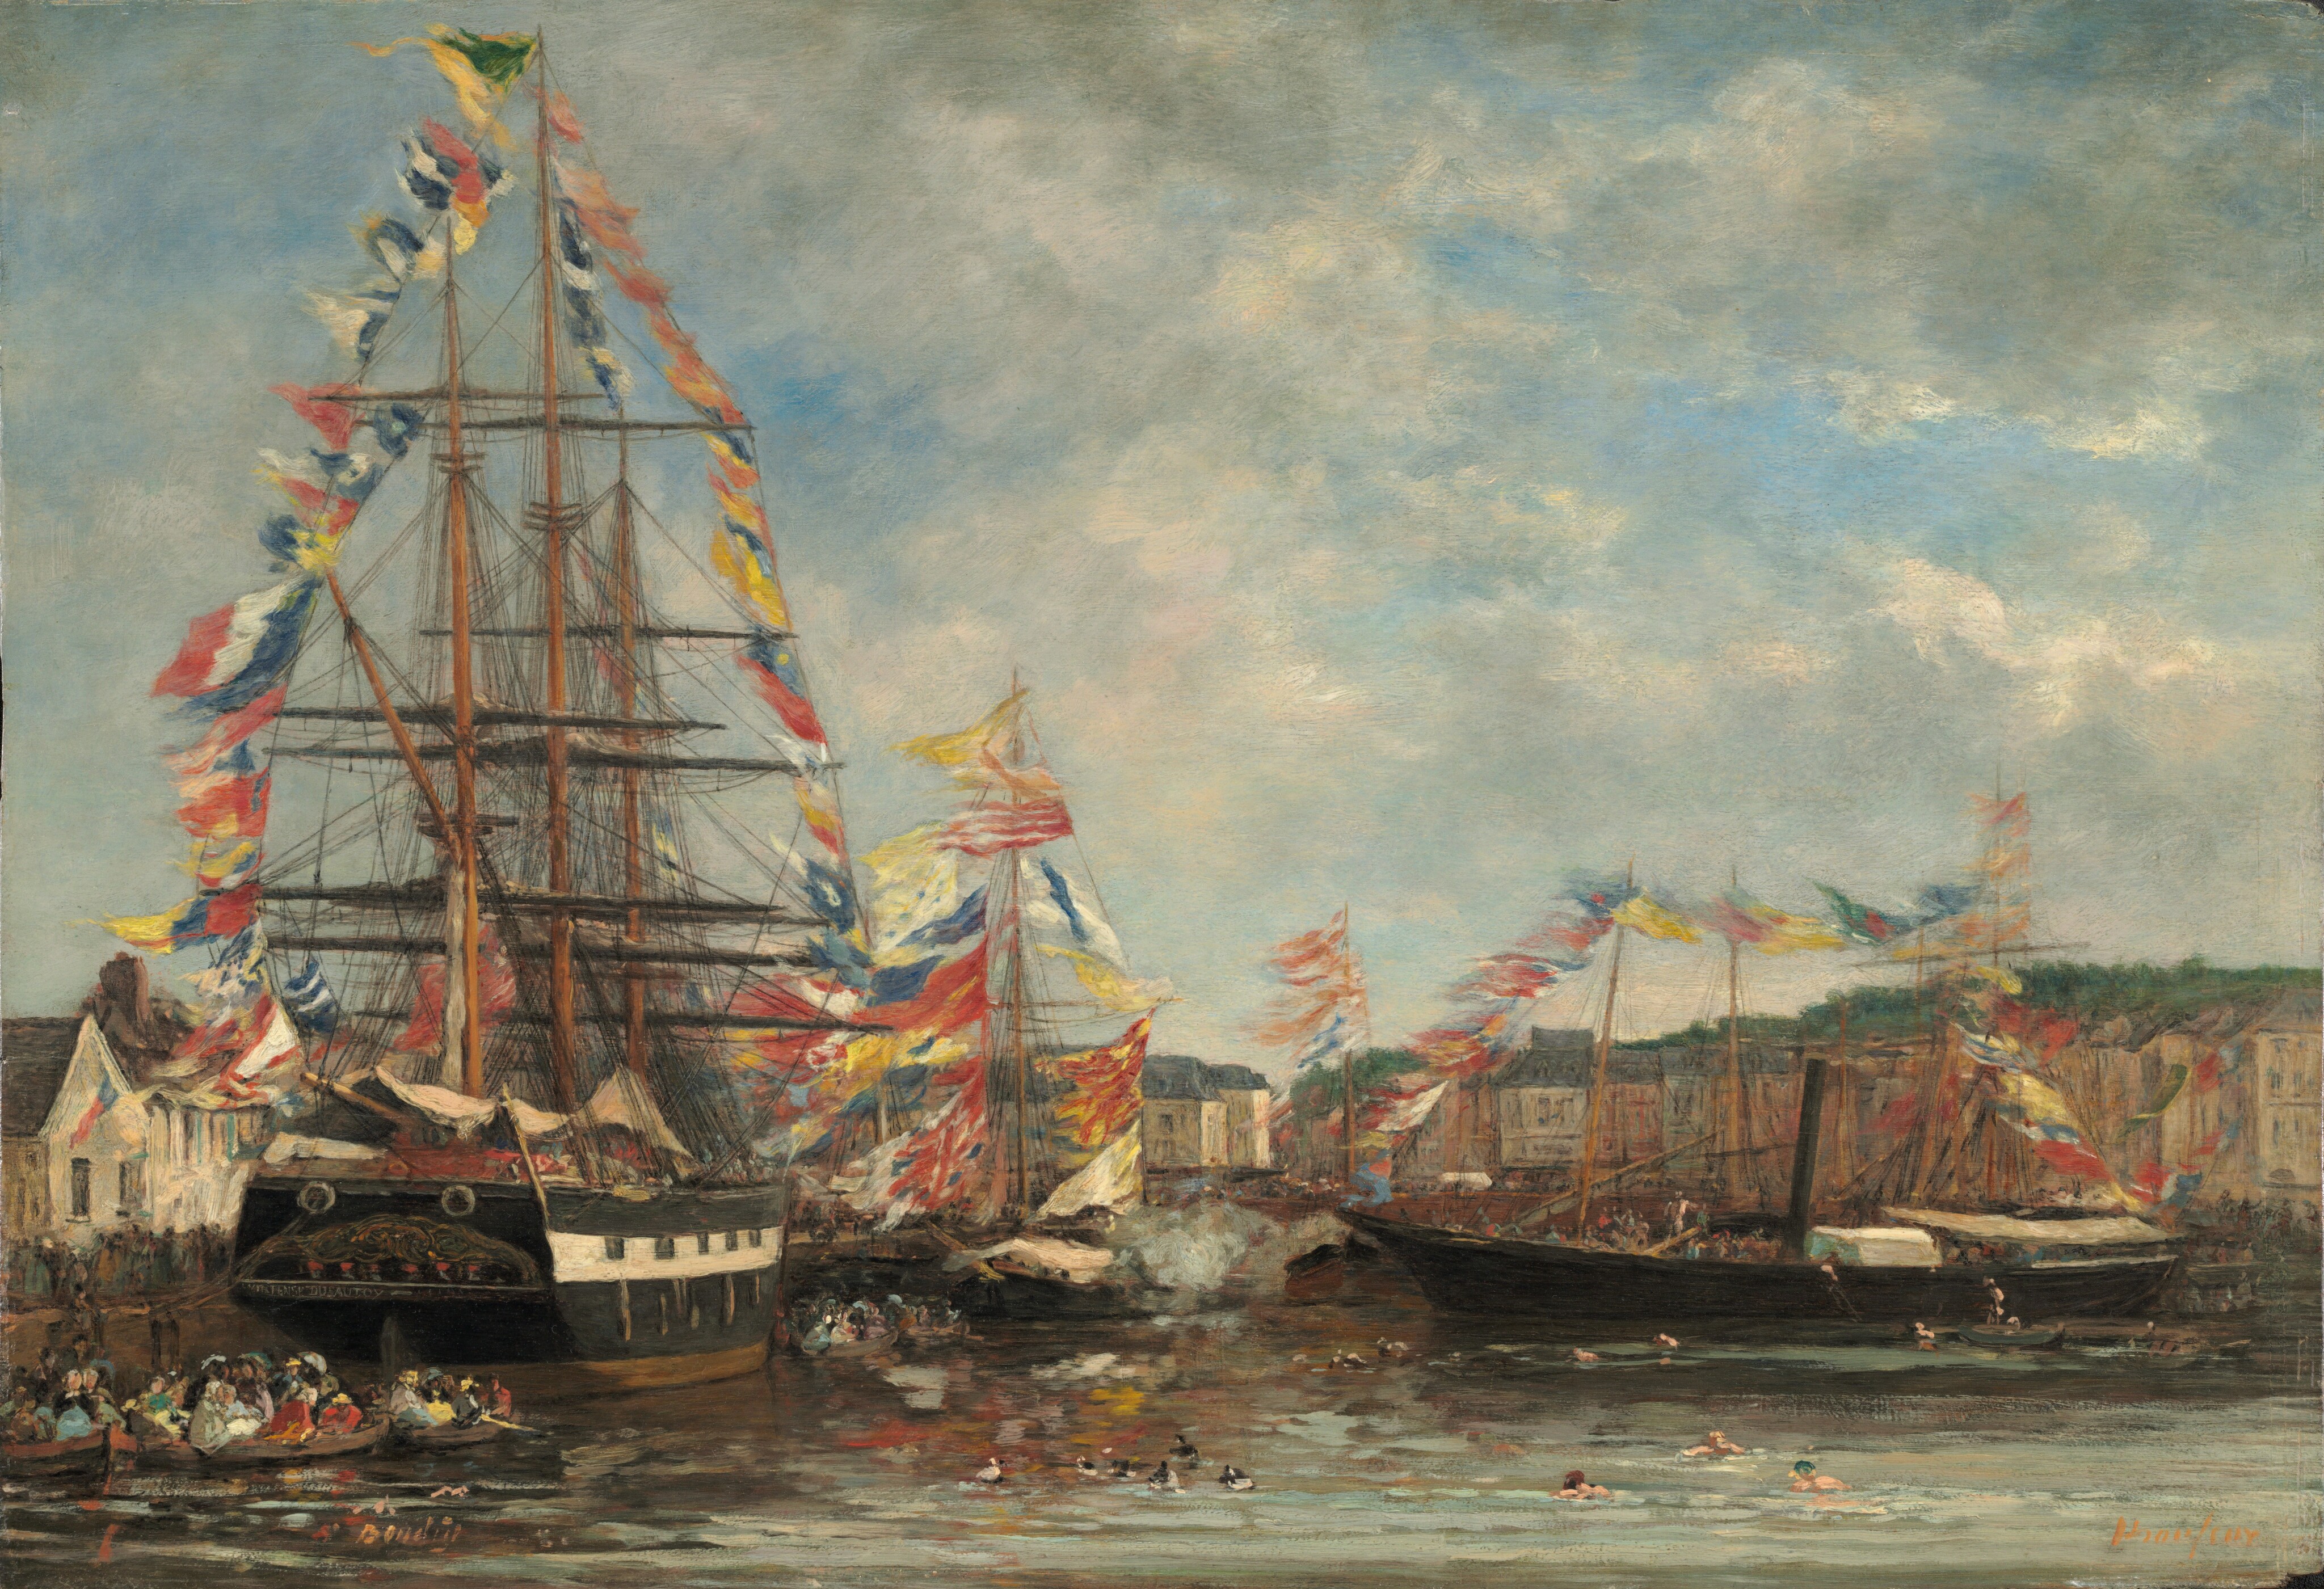 A painting depicting three large ships with colorful flags attached to the halyard, docked in the harbor. In the water, there are small boats filled with passengers and also people swimming. In the background, there are rows of buildings.